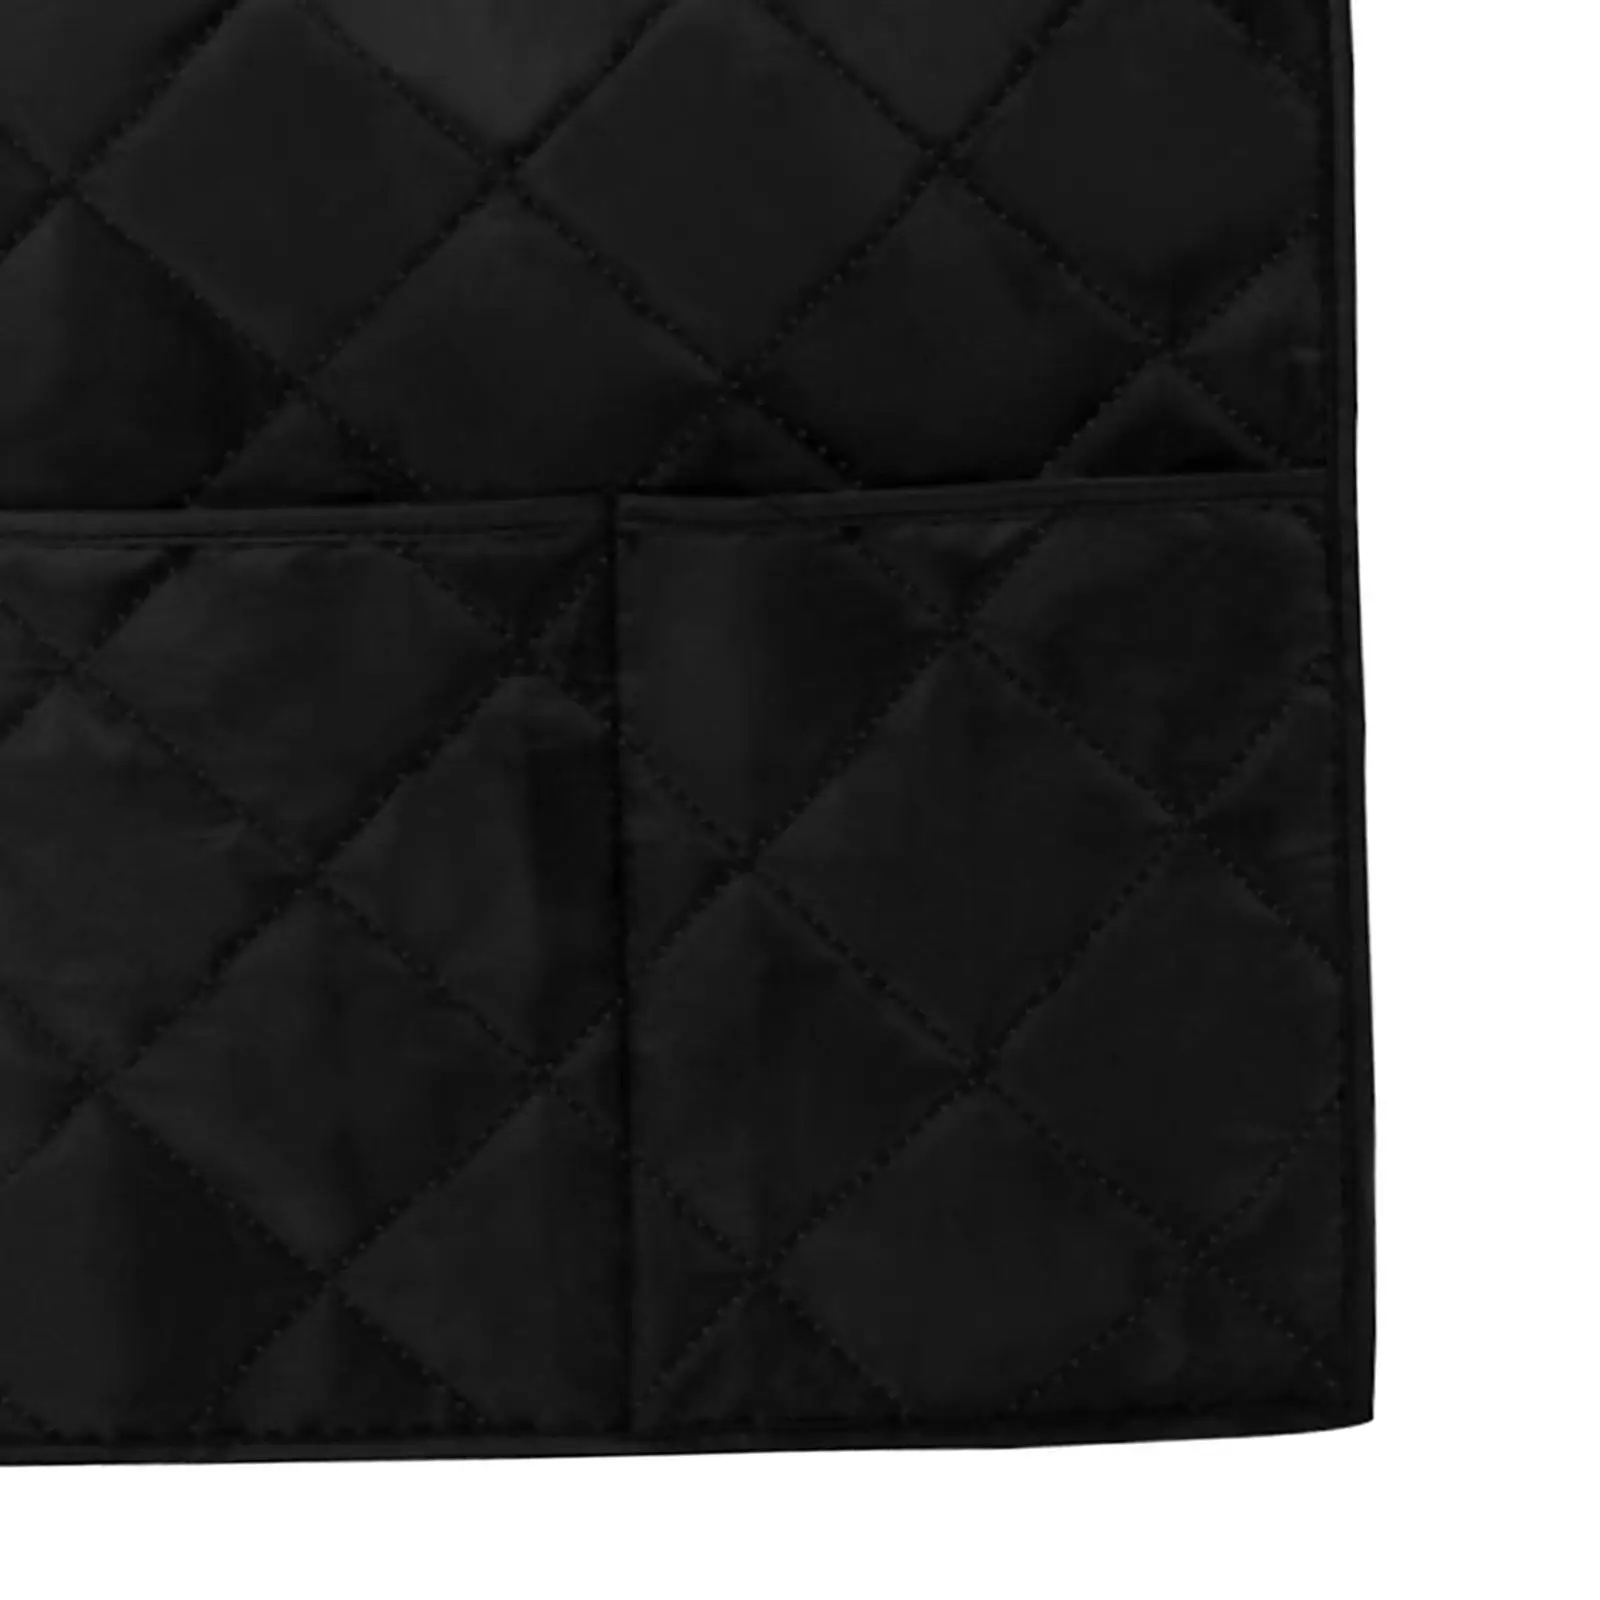 Espresso Machine Quilted Protective Cover Coffee Machine Cover, Universal Reusable Waterproof for Bar Kitchen Coffee Shop